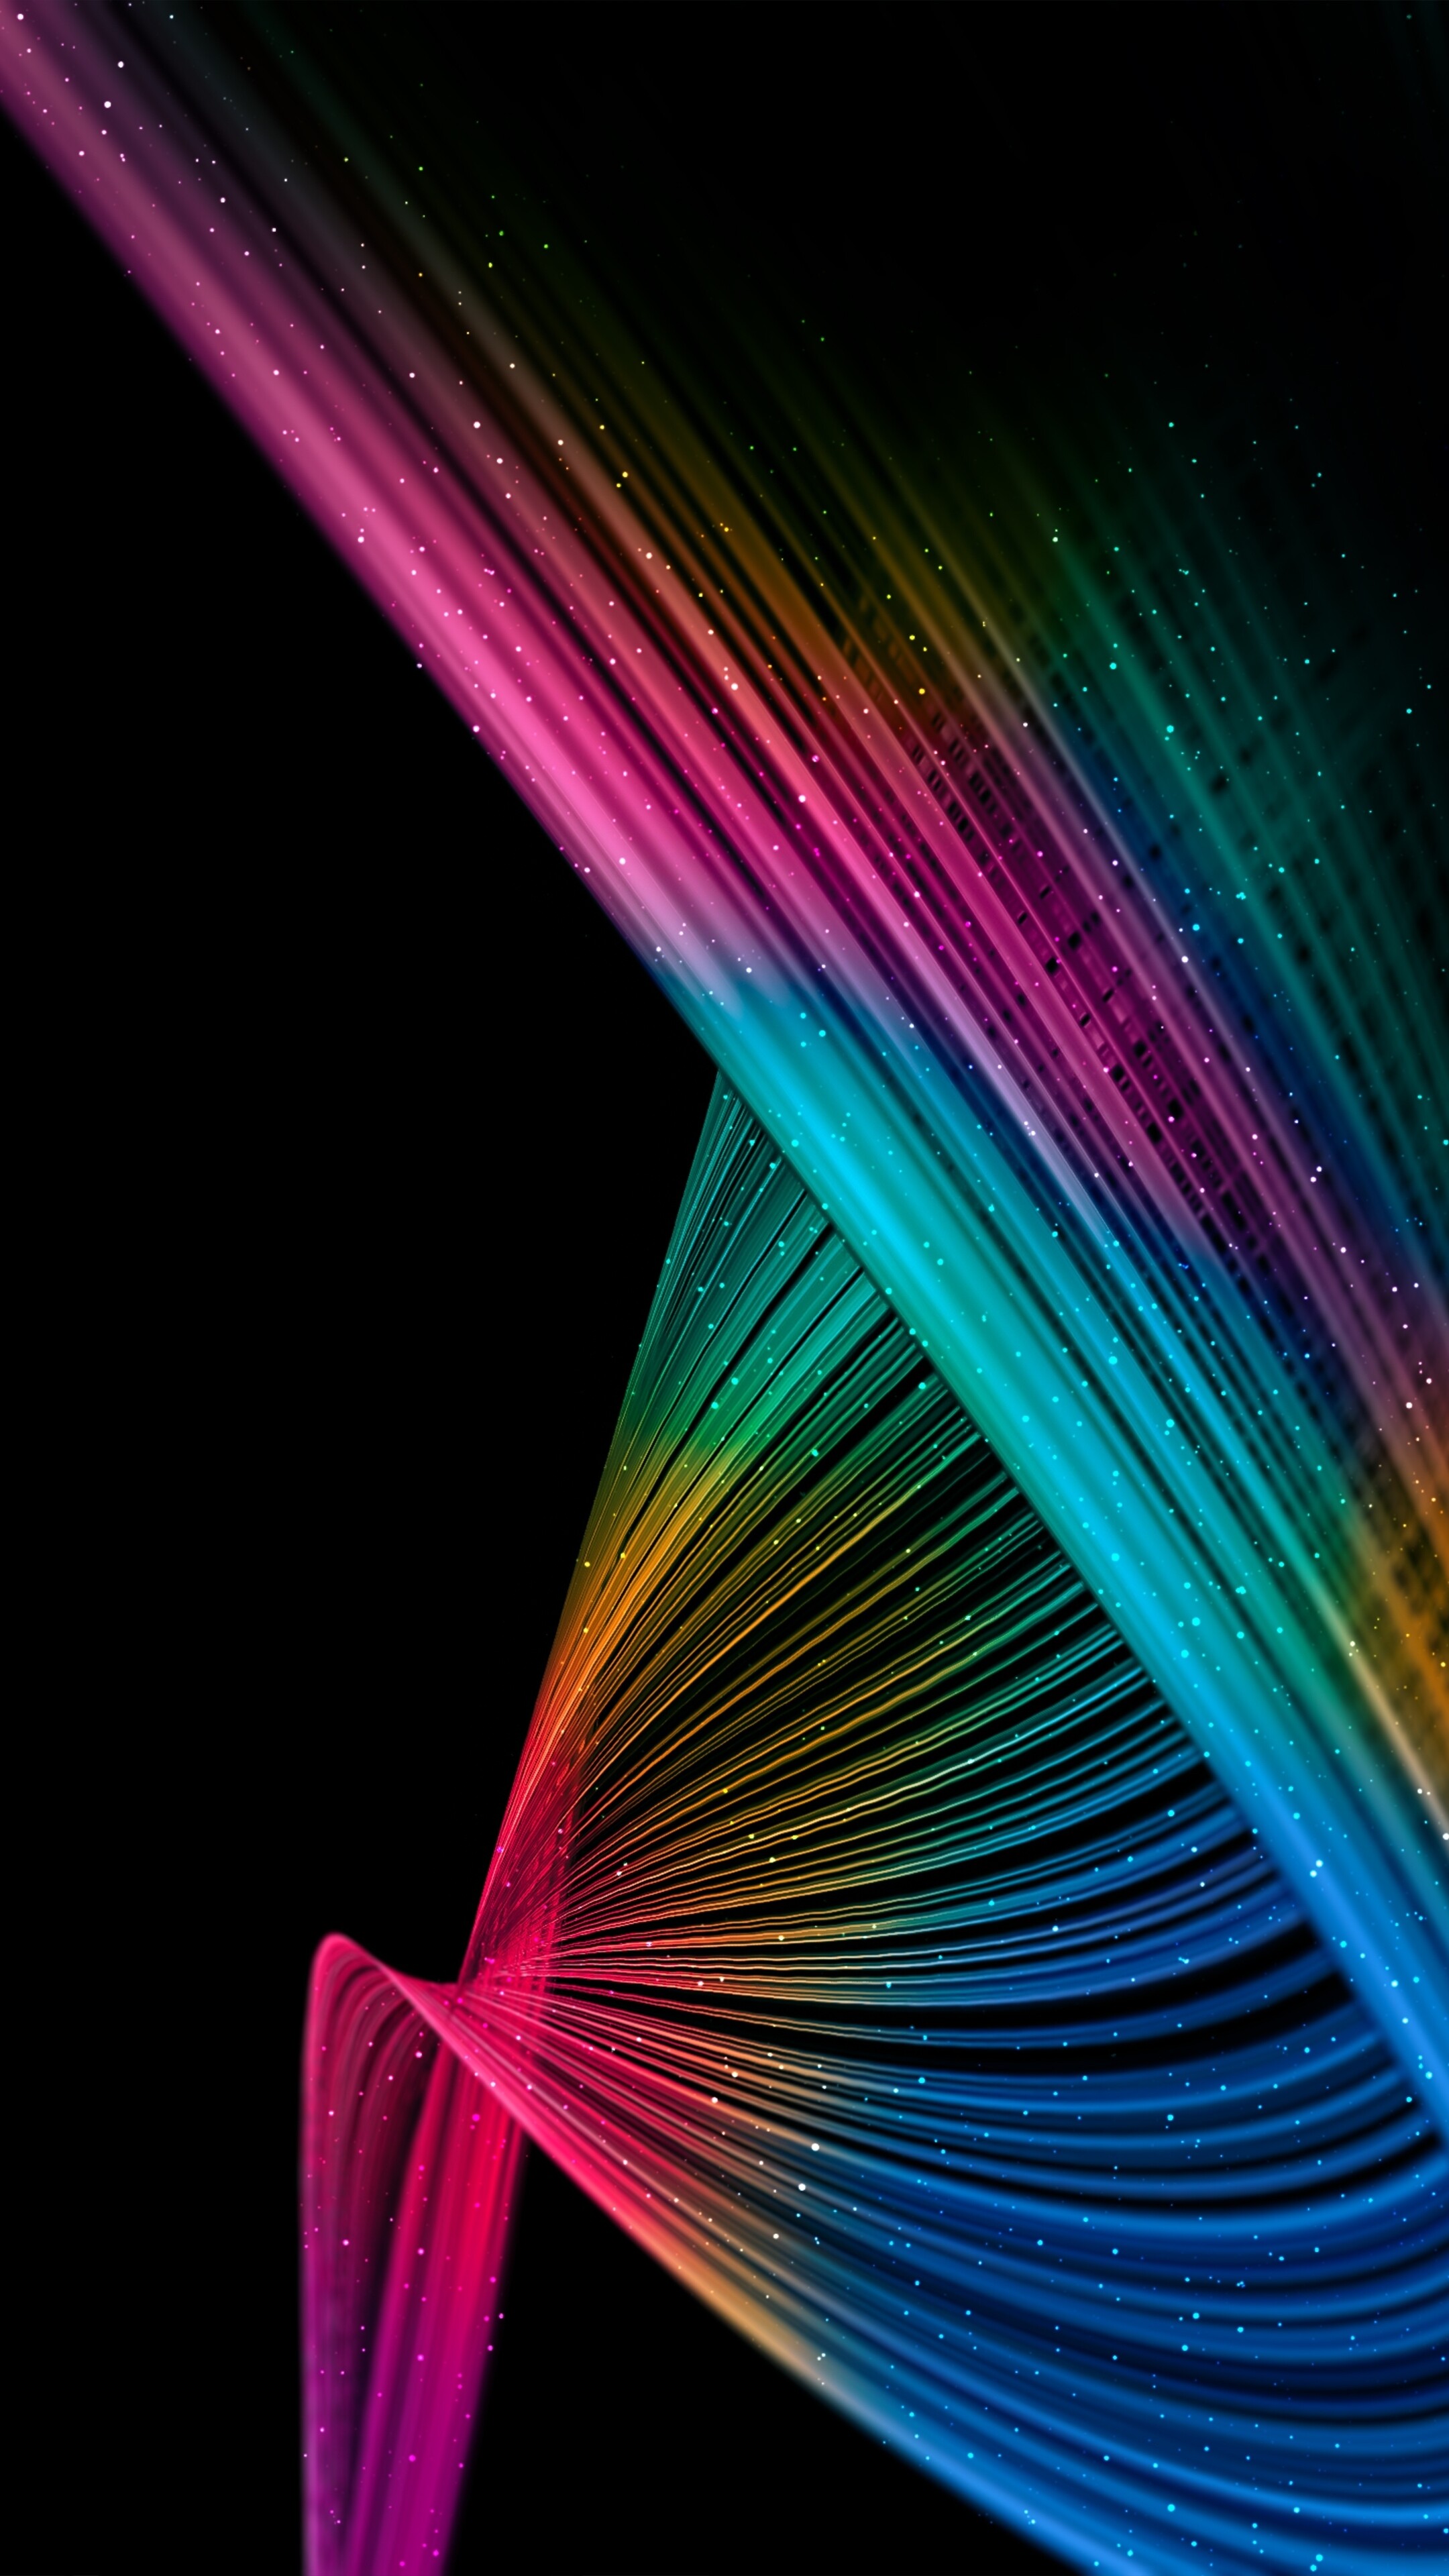 Glow in the Dark: Steamy neon threads, Abstract, Extra-spectral, Colorful lines. 2160x3840 4K Wallpaper.